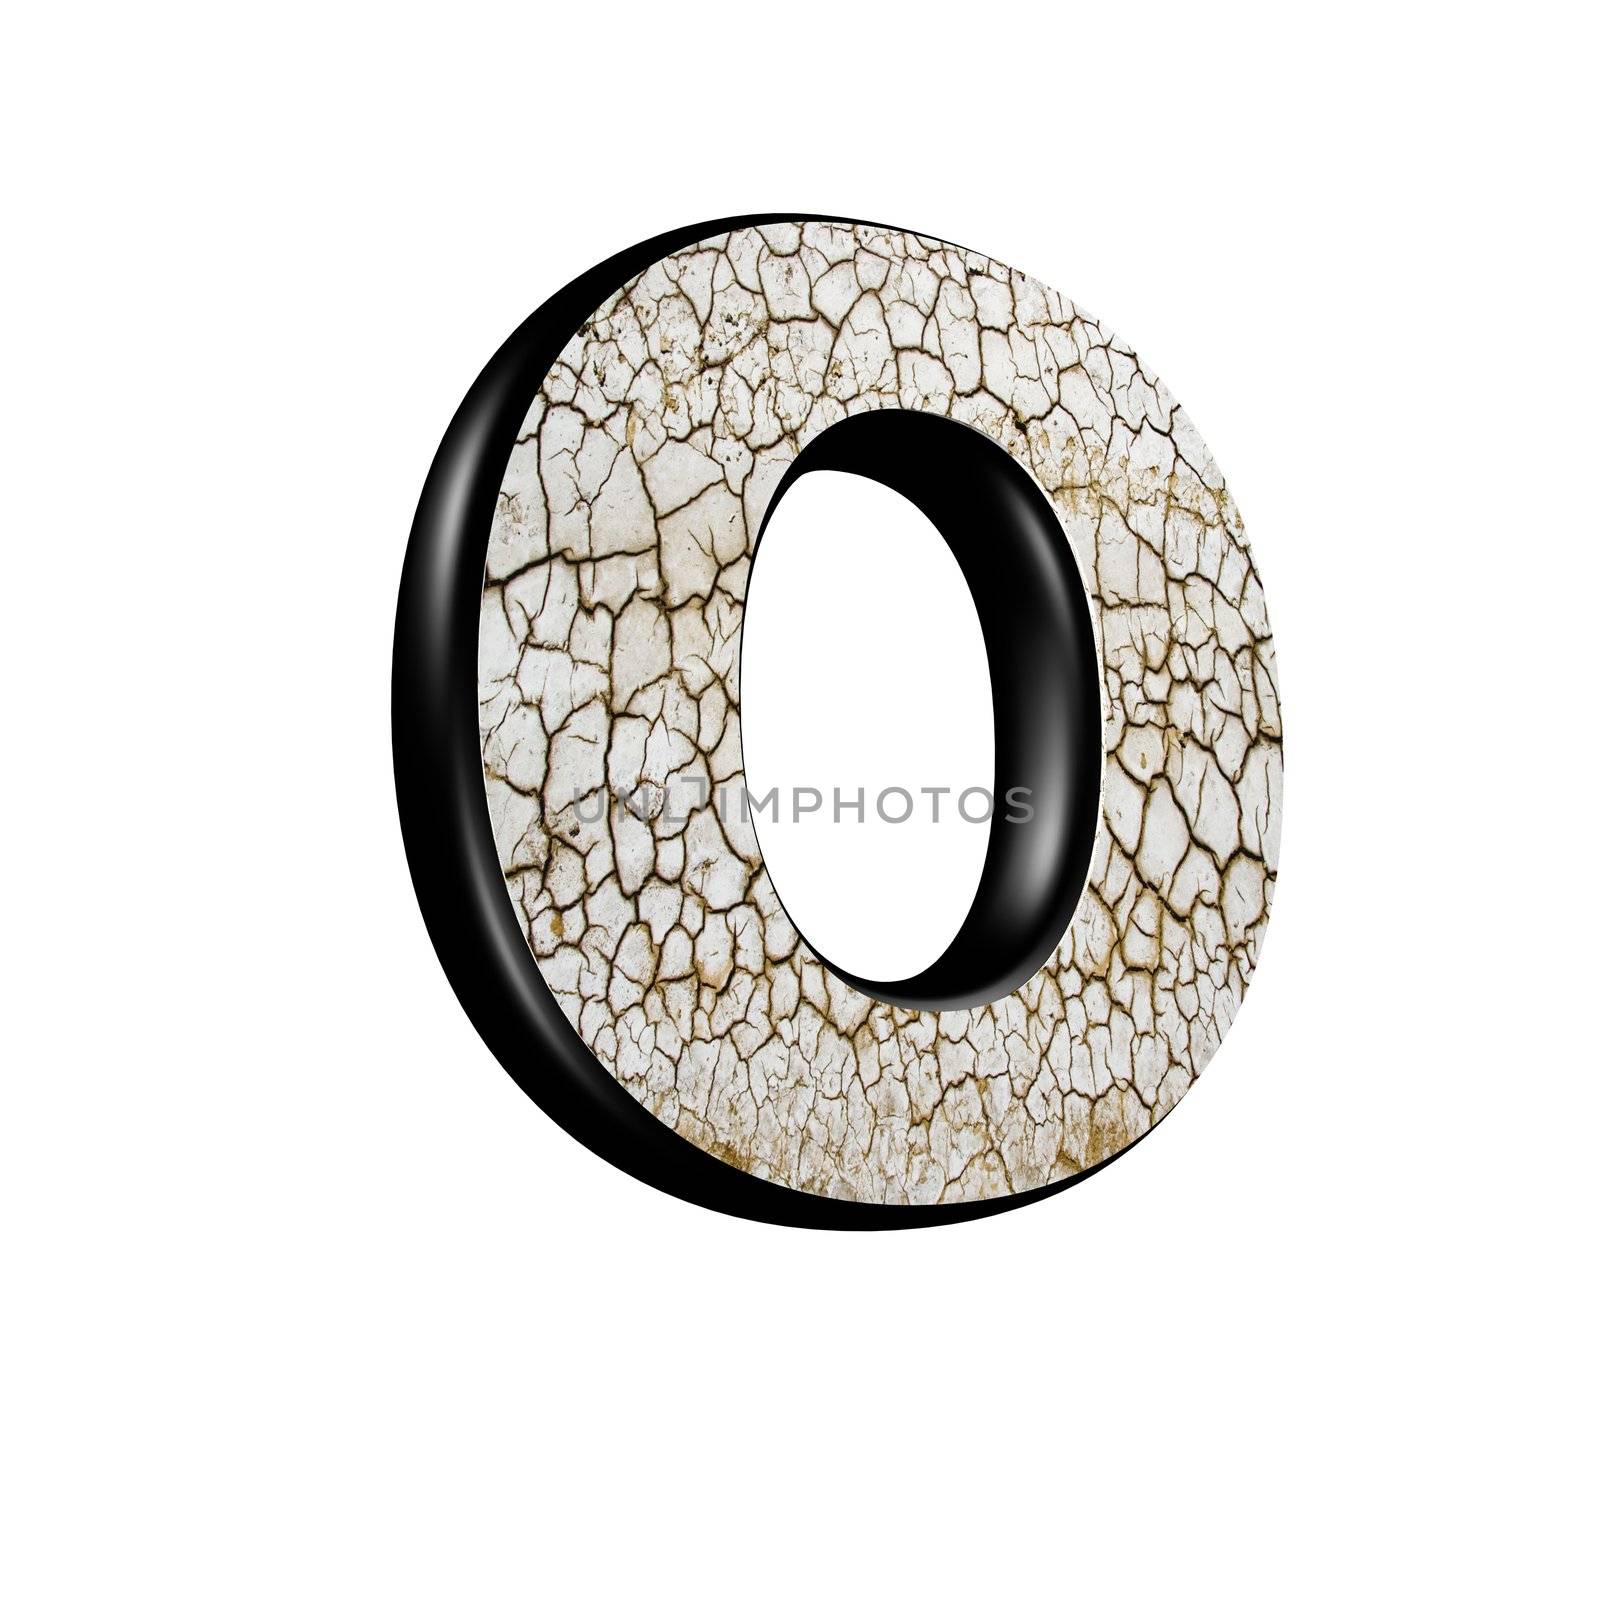 abstract 3d letter with dry ground texture - O by chrisroll